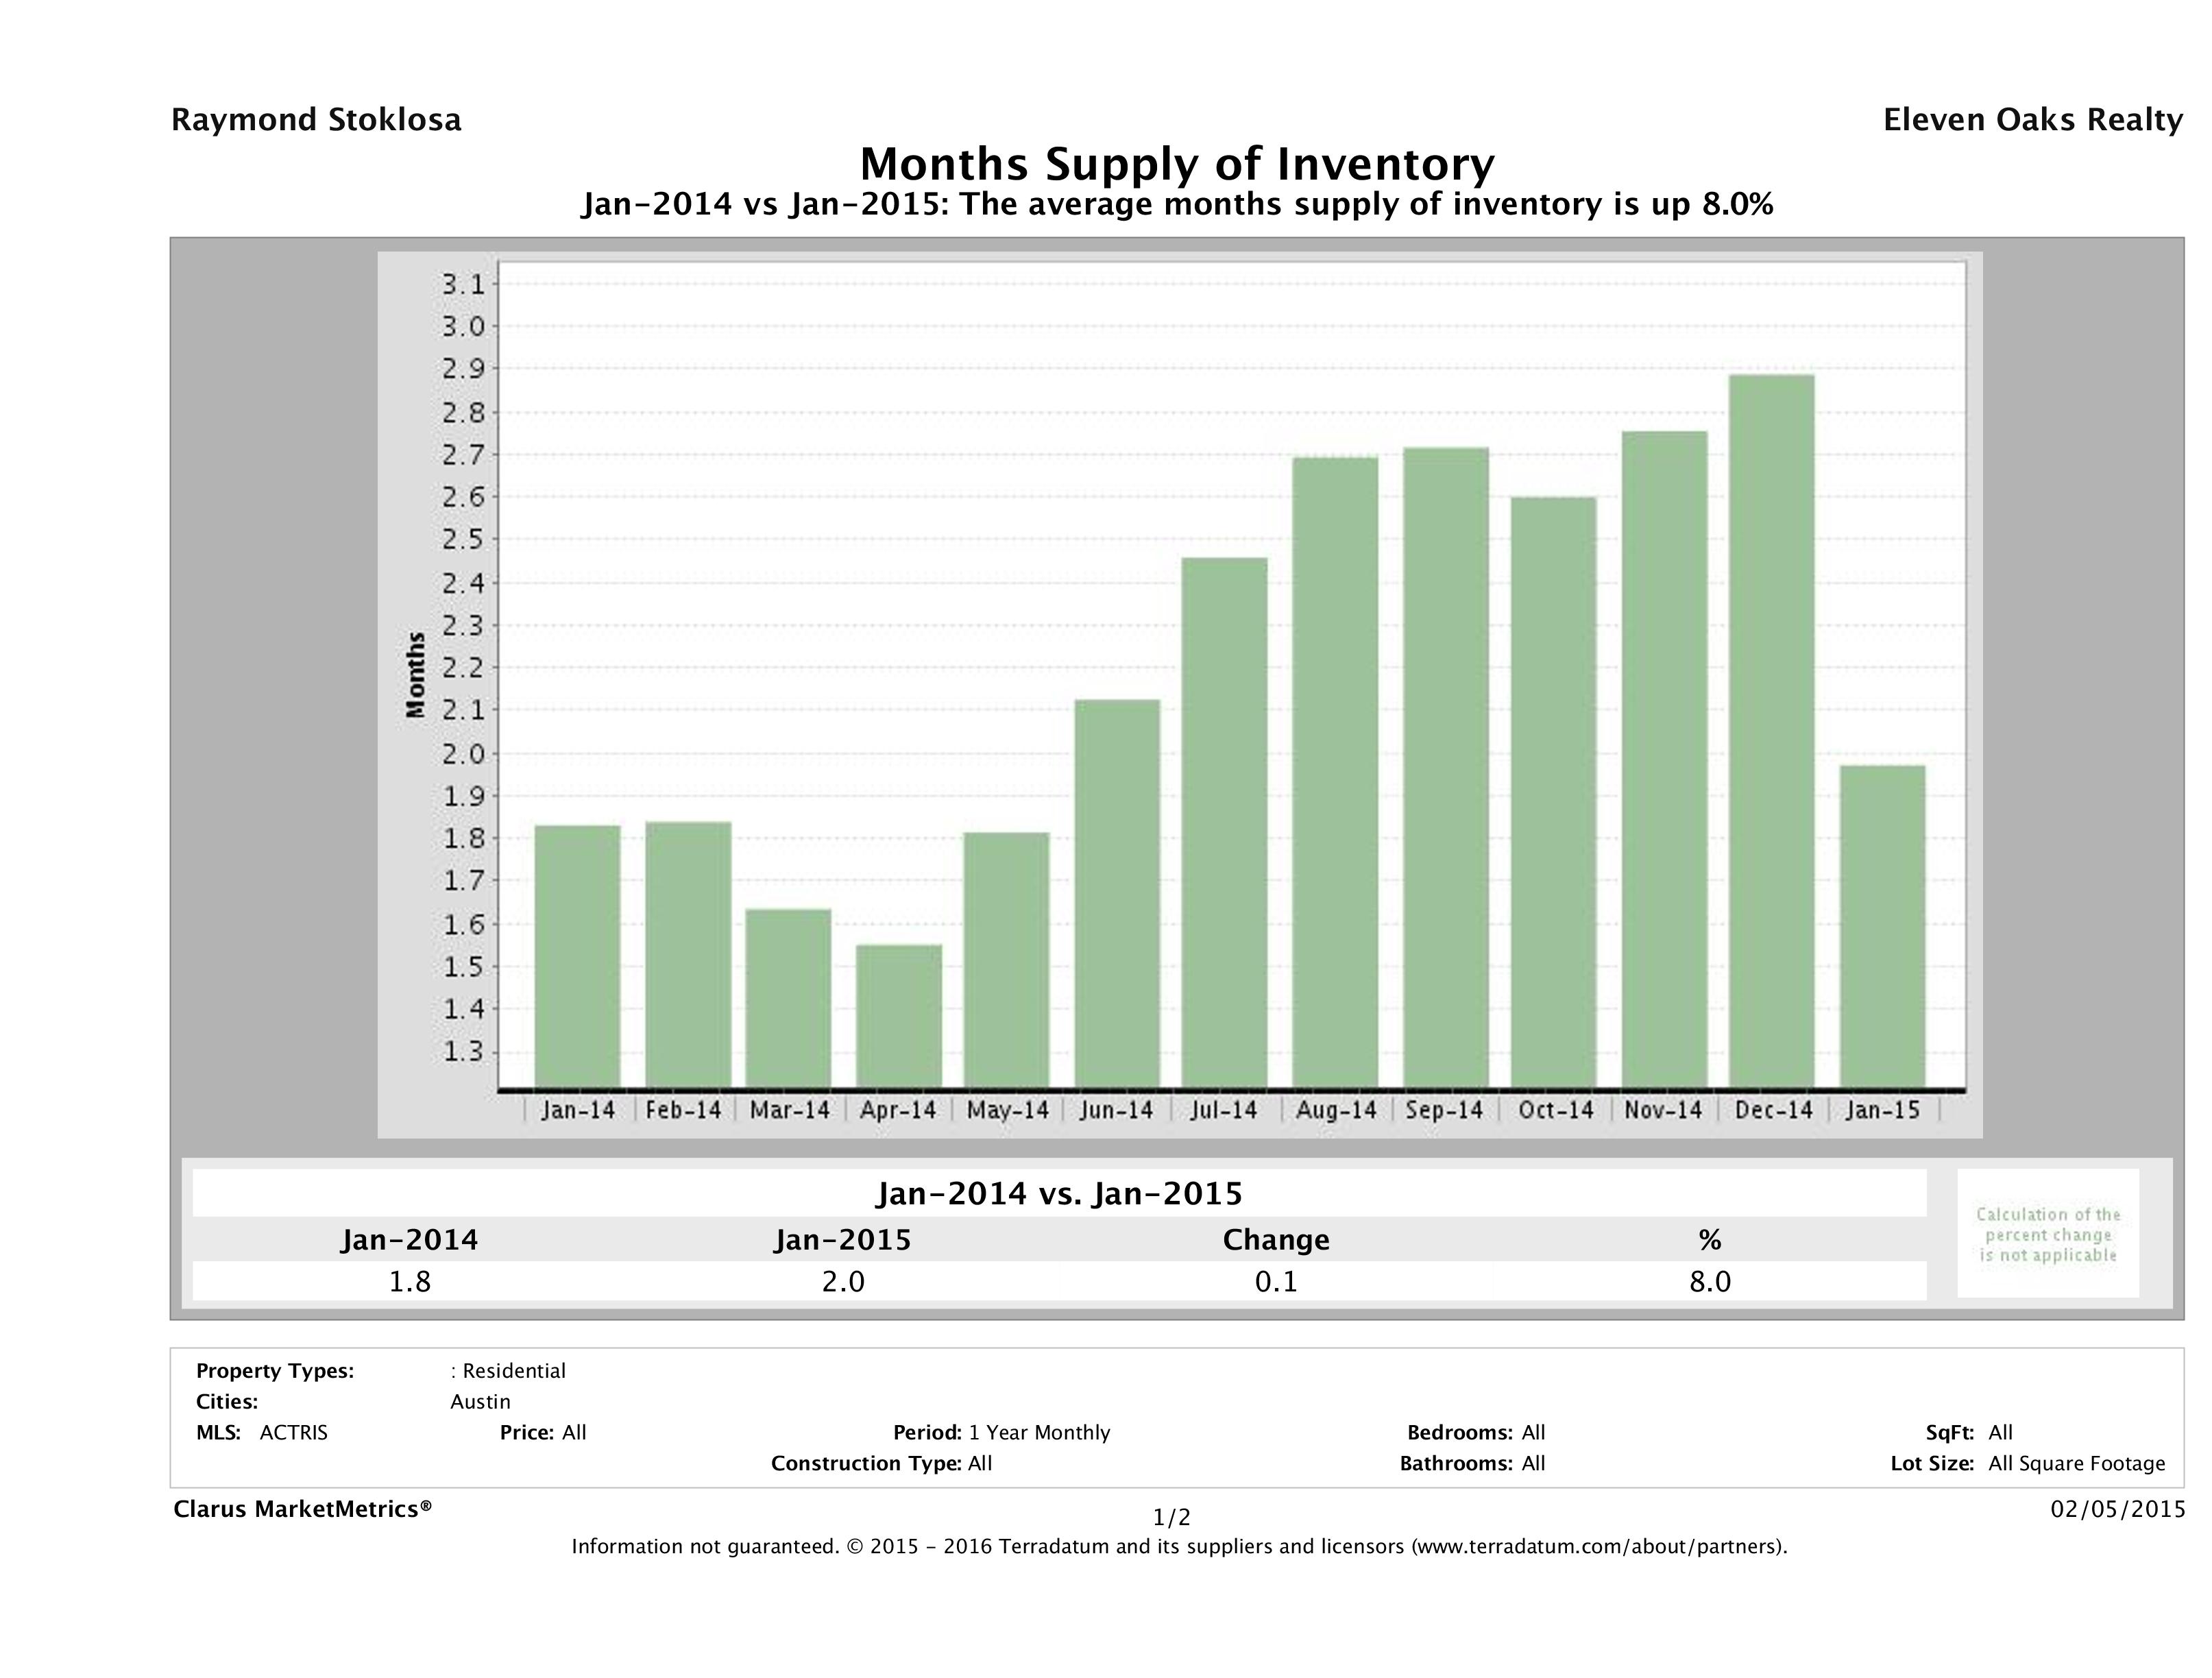 Austin single family home months inventory January 2015